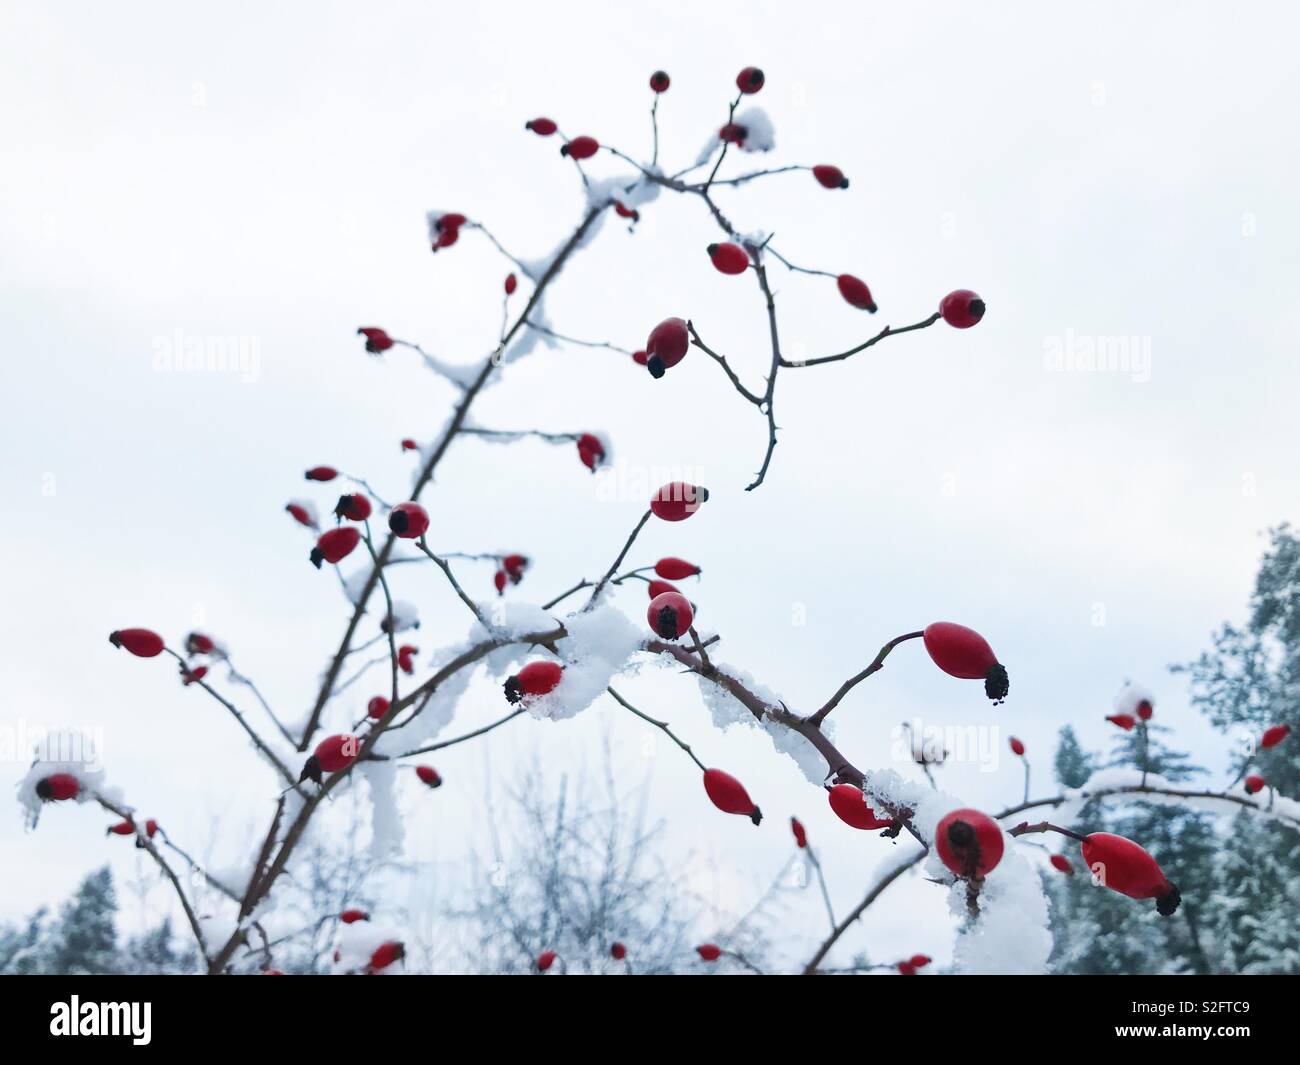 Branch of a Rose Hip shrub covered in snow with overcast sky in the background. Space for copy. Stock Photo